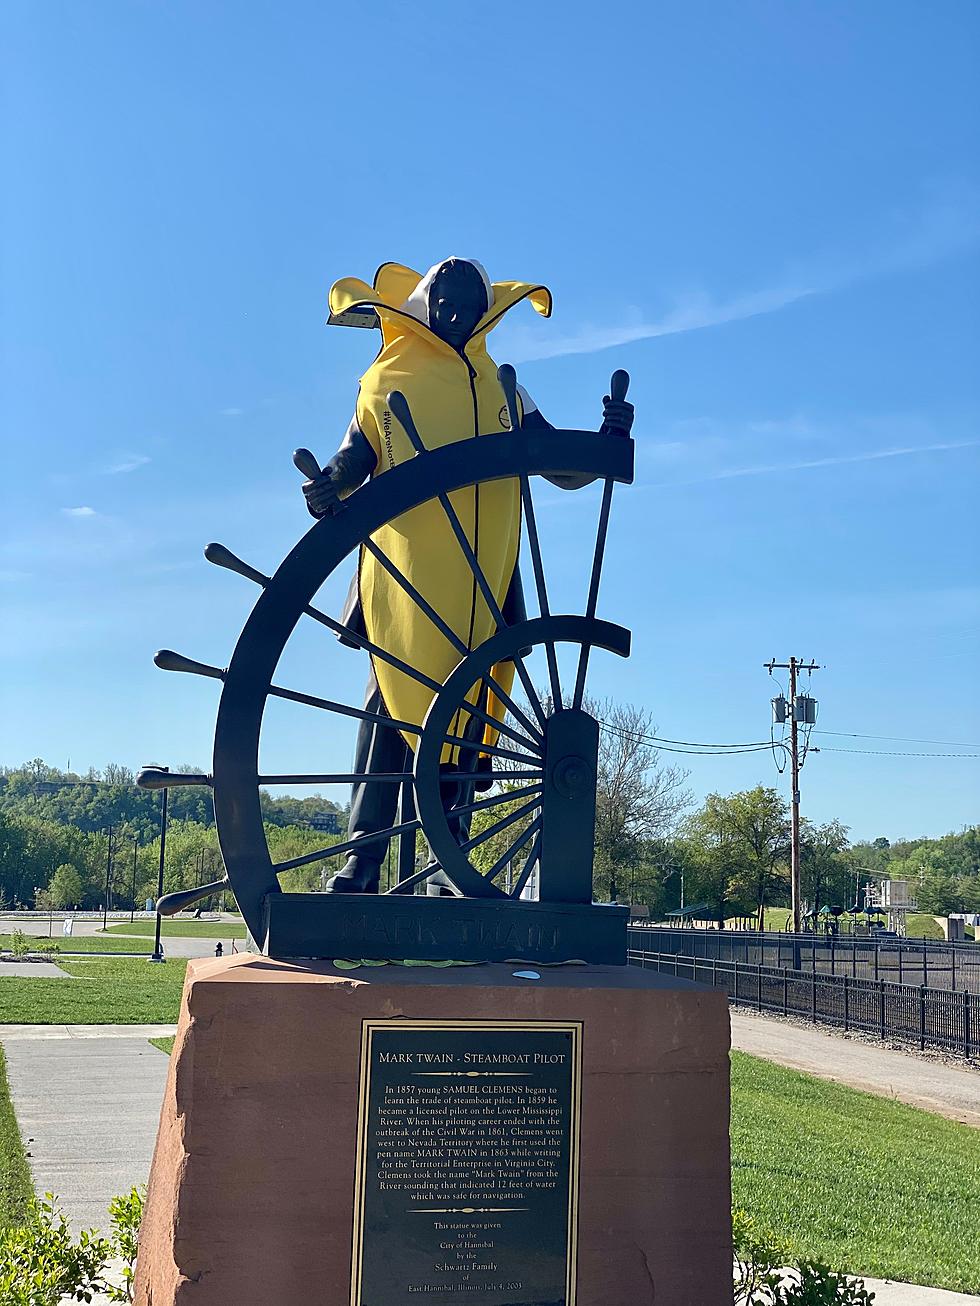 Why was a Banana-clad Mark Twain on the Riverfront?